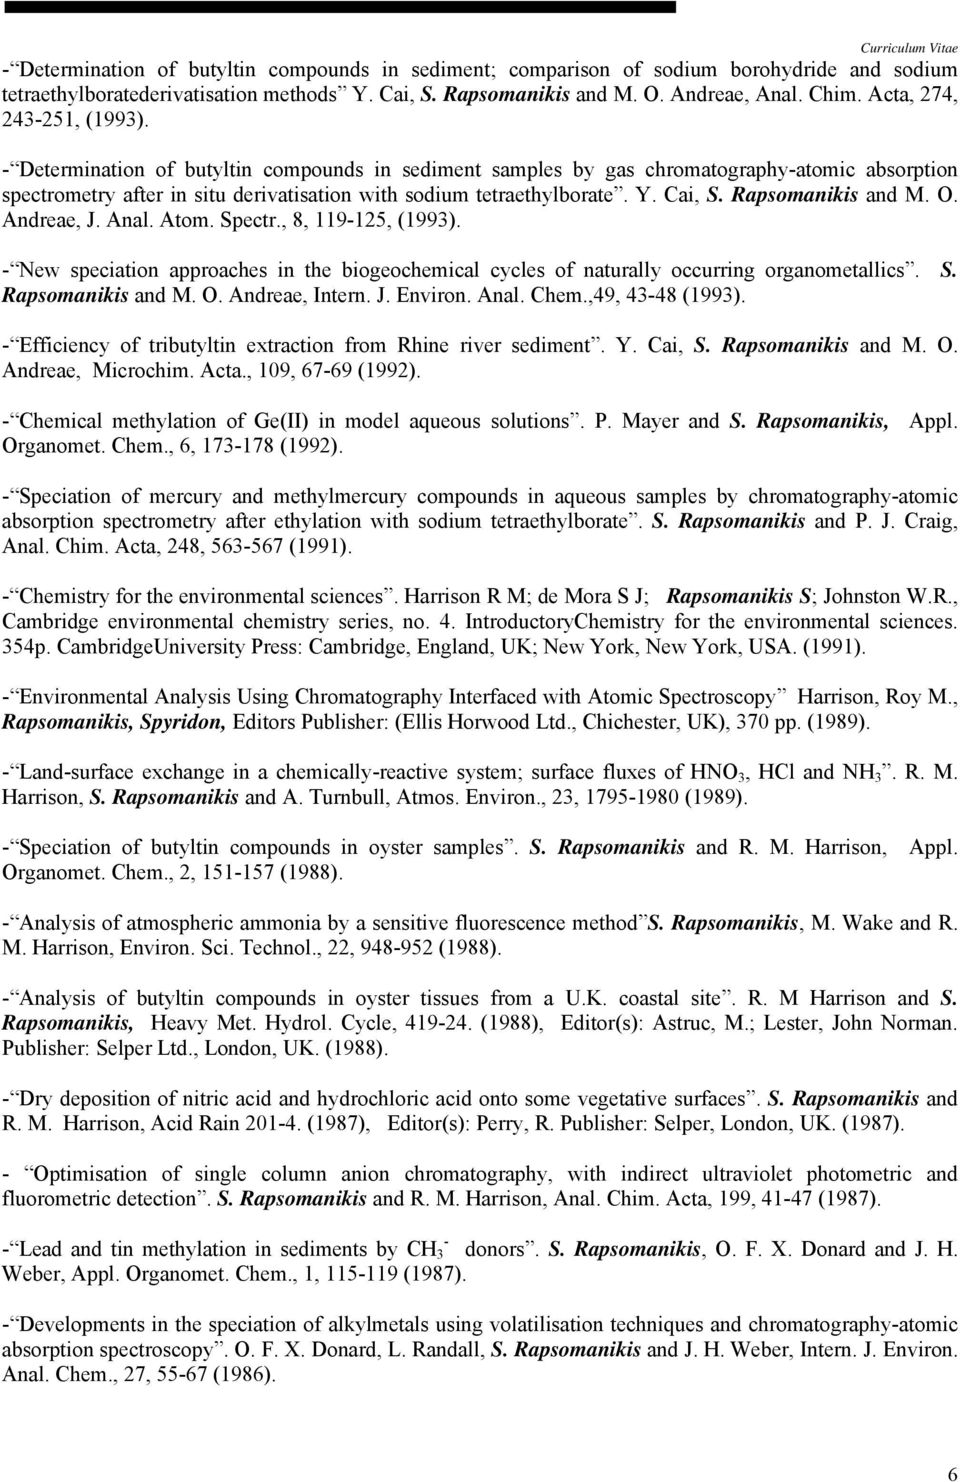 Cai, S. Rapsomanikis and M. O. Andreae, J. Anal. Atom. Spectr., 8, 119-125, (1993). - New speciation approaches in the biogeochemical cycles of naturally occurring organometallics. S. Rapsomanikis and M. O. Andreae, Intern.